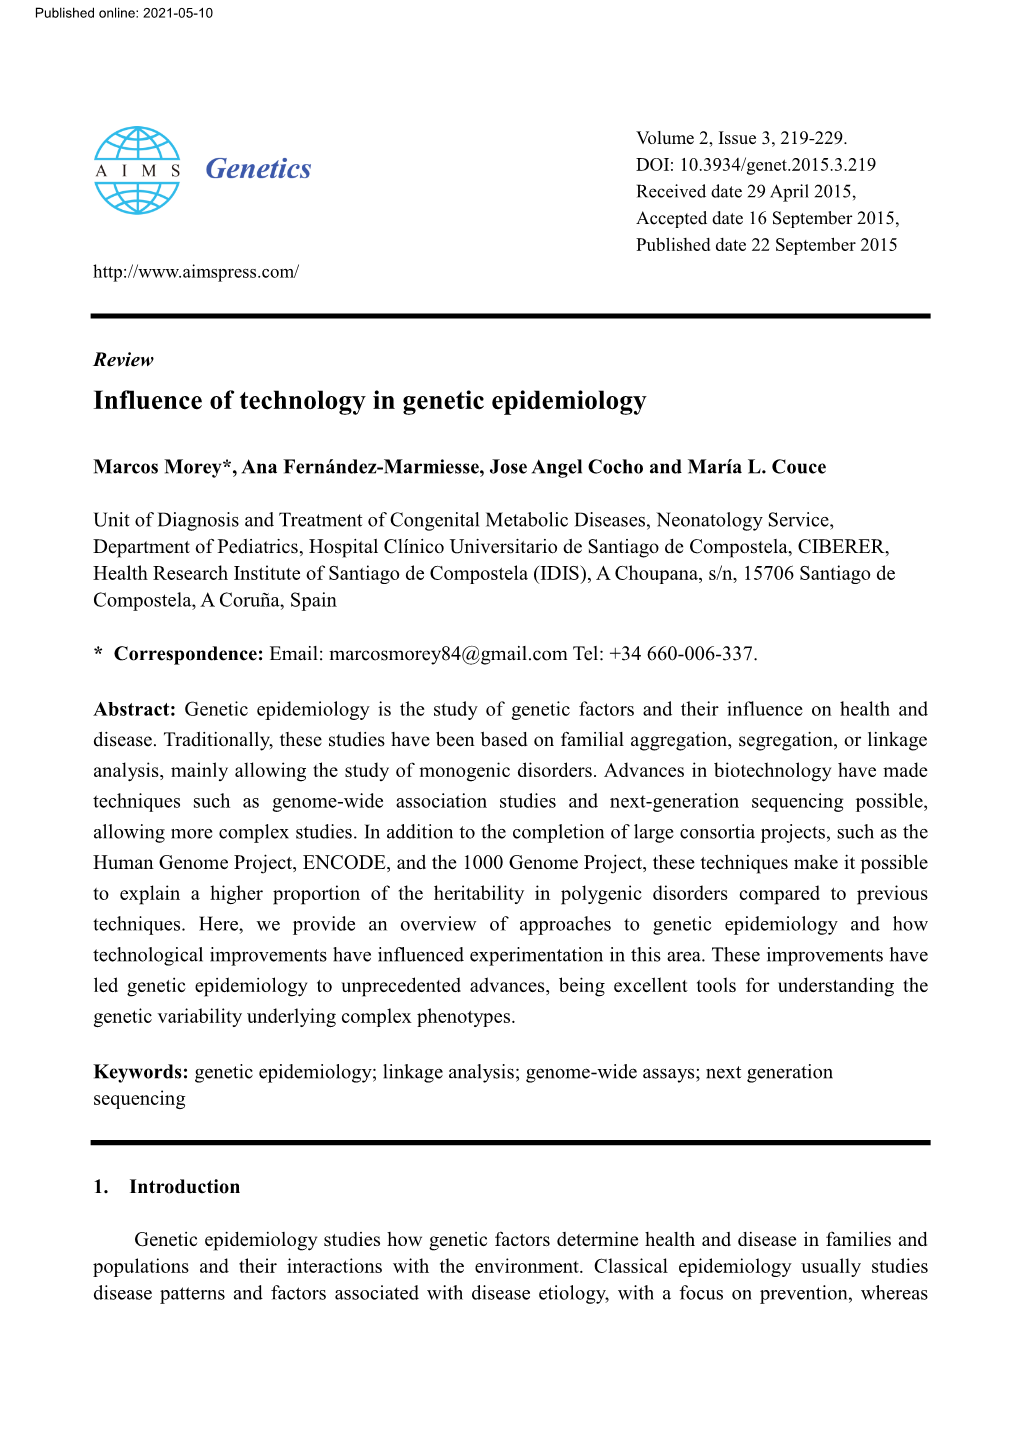 Influence of Technology in Genetic Epidemiology